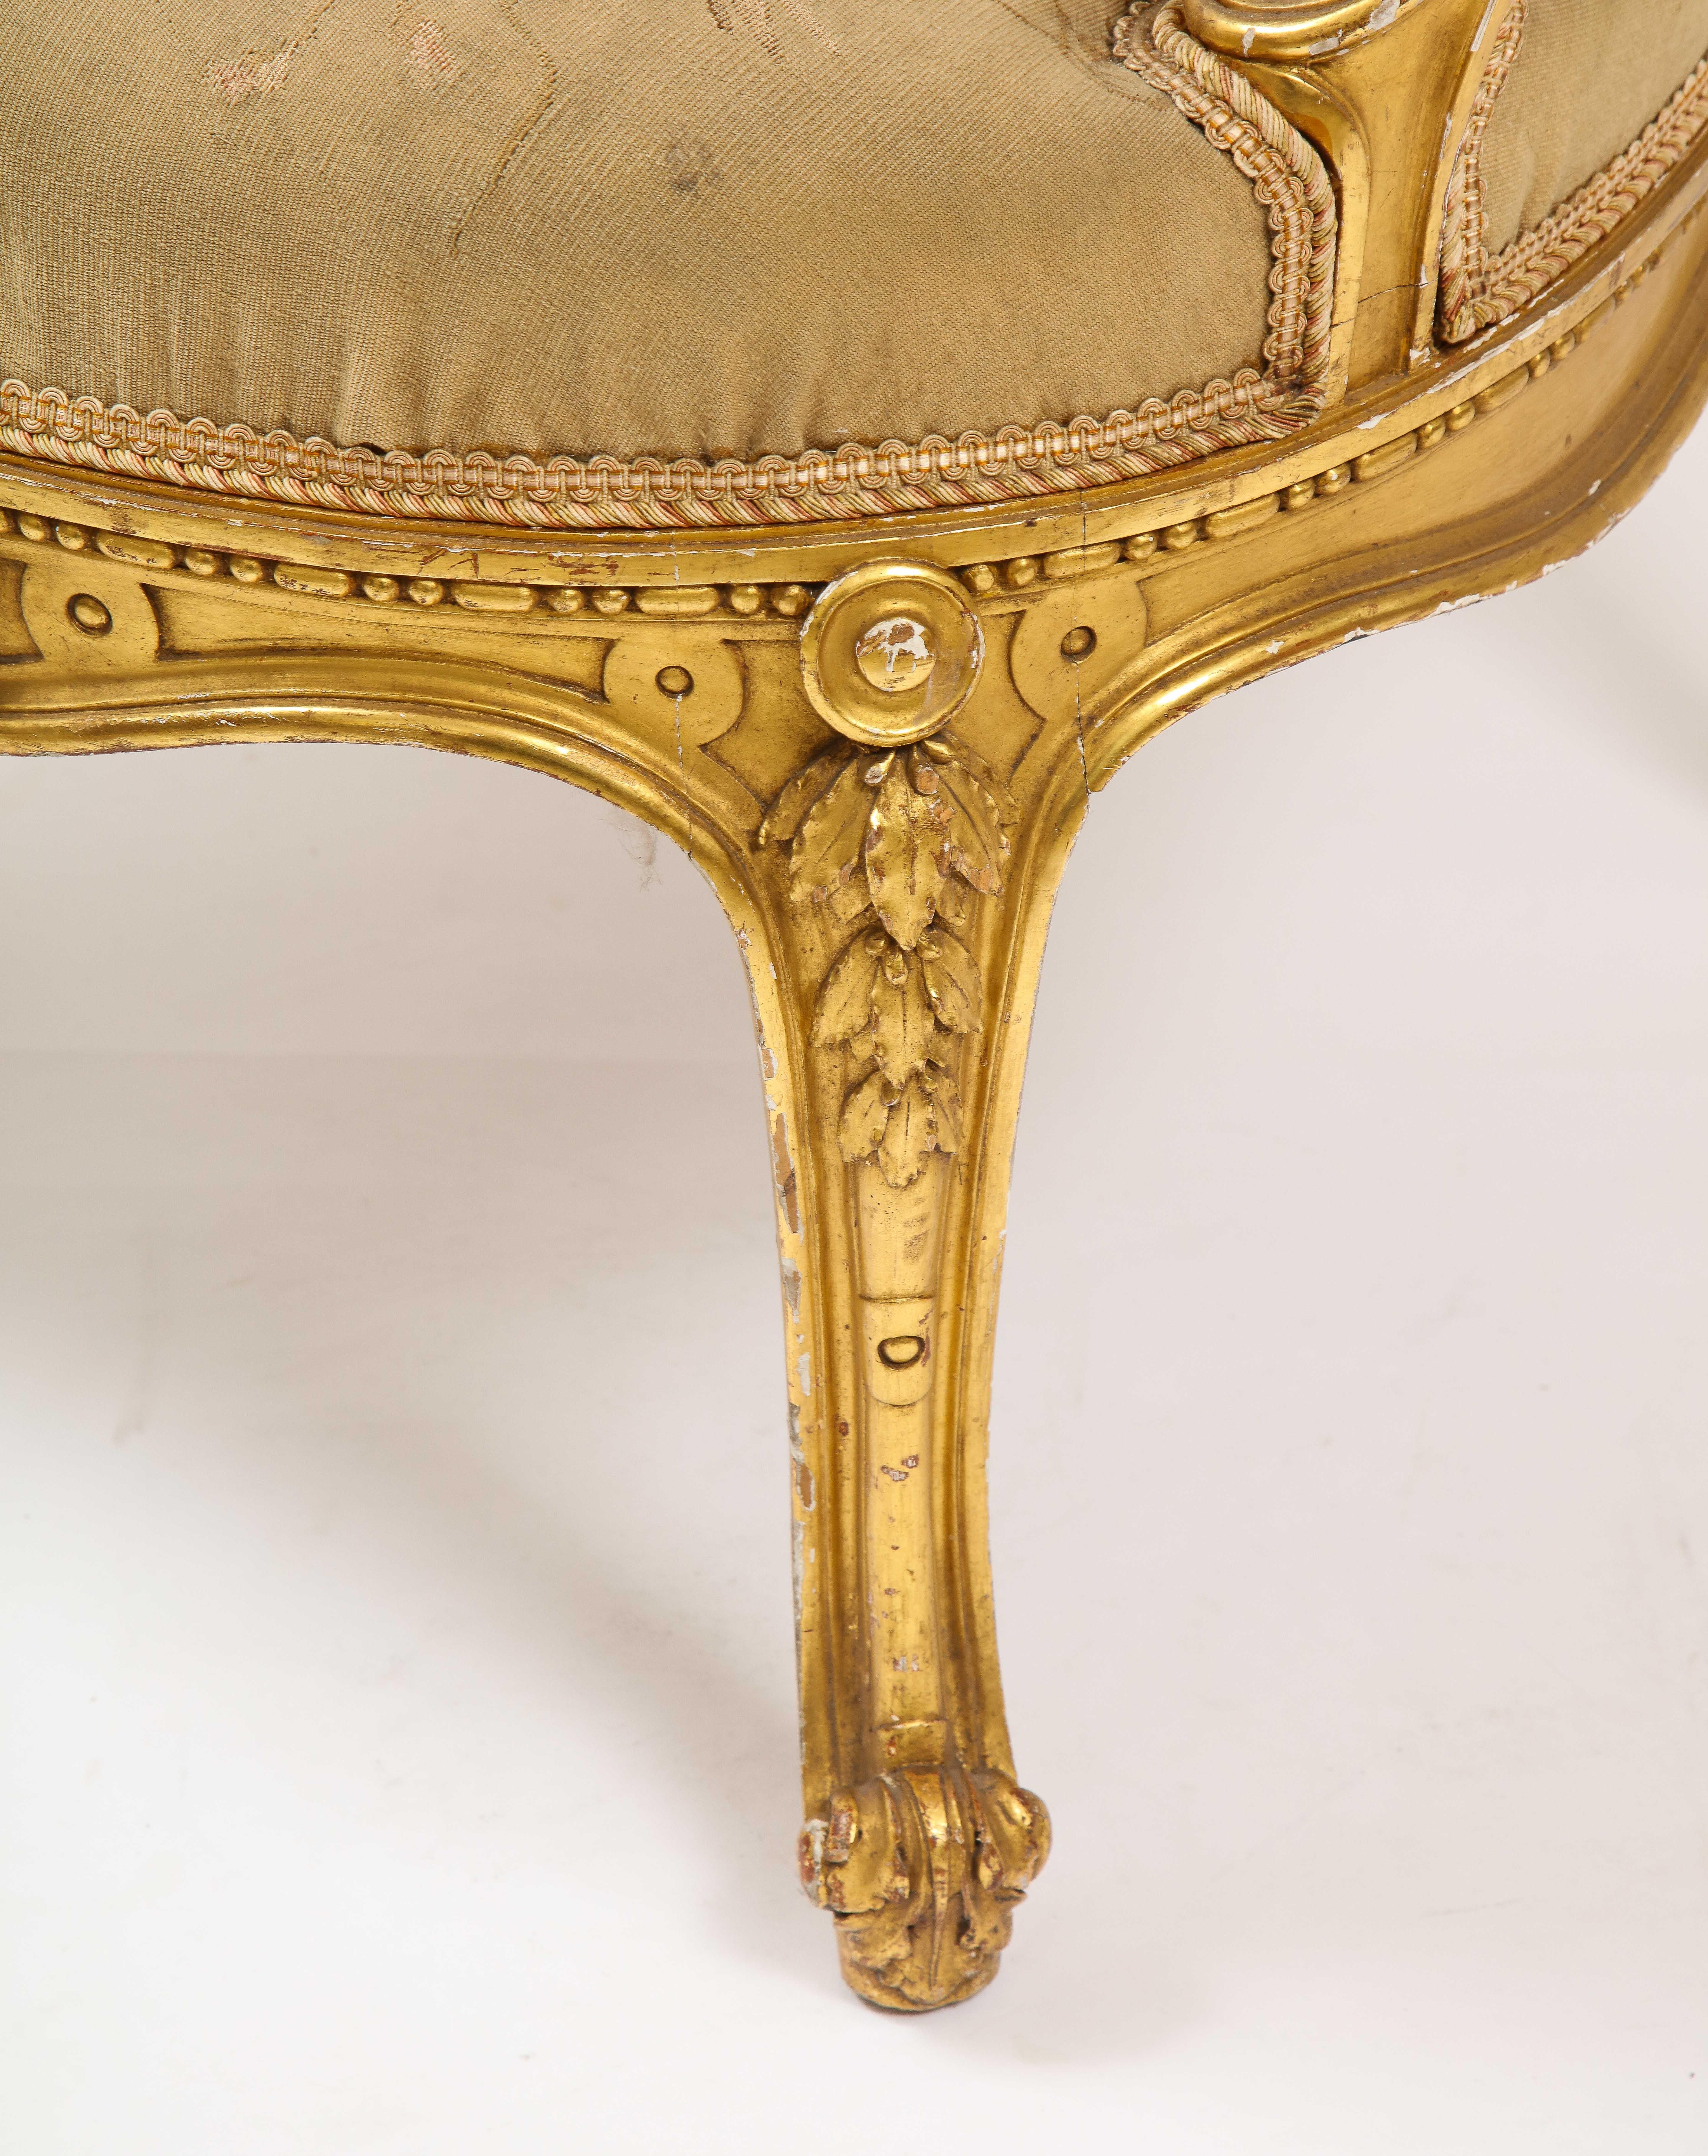 An Antique French 19th C. 5 Piece Royal Giltwood & Aubusson Suite, Att. Linke 12